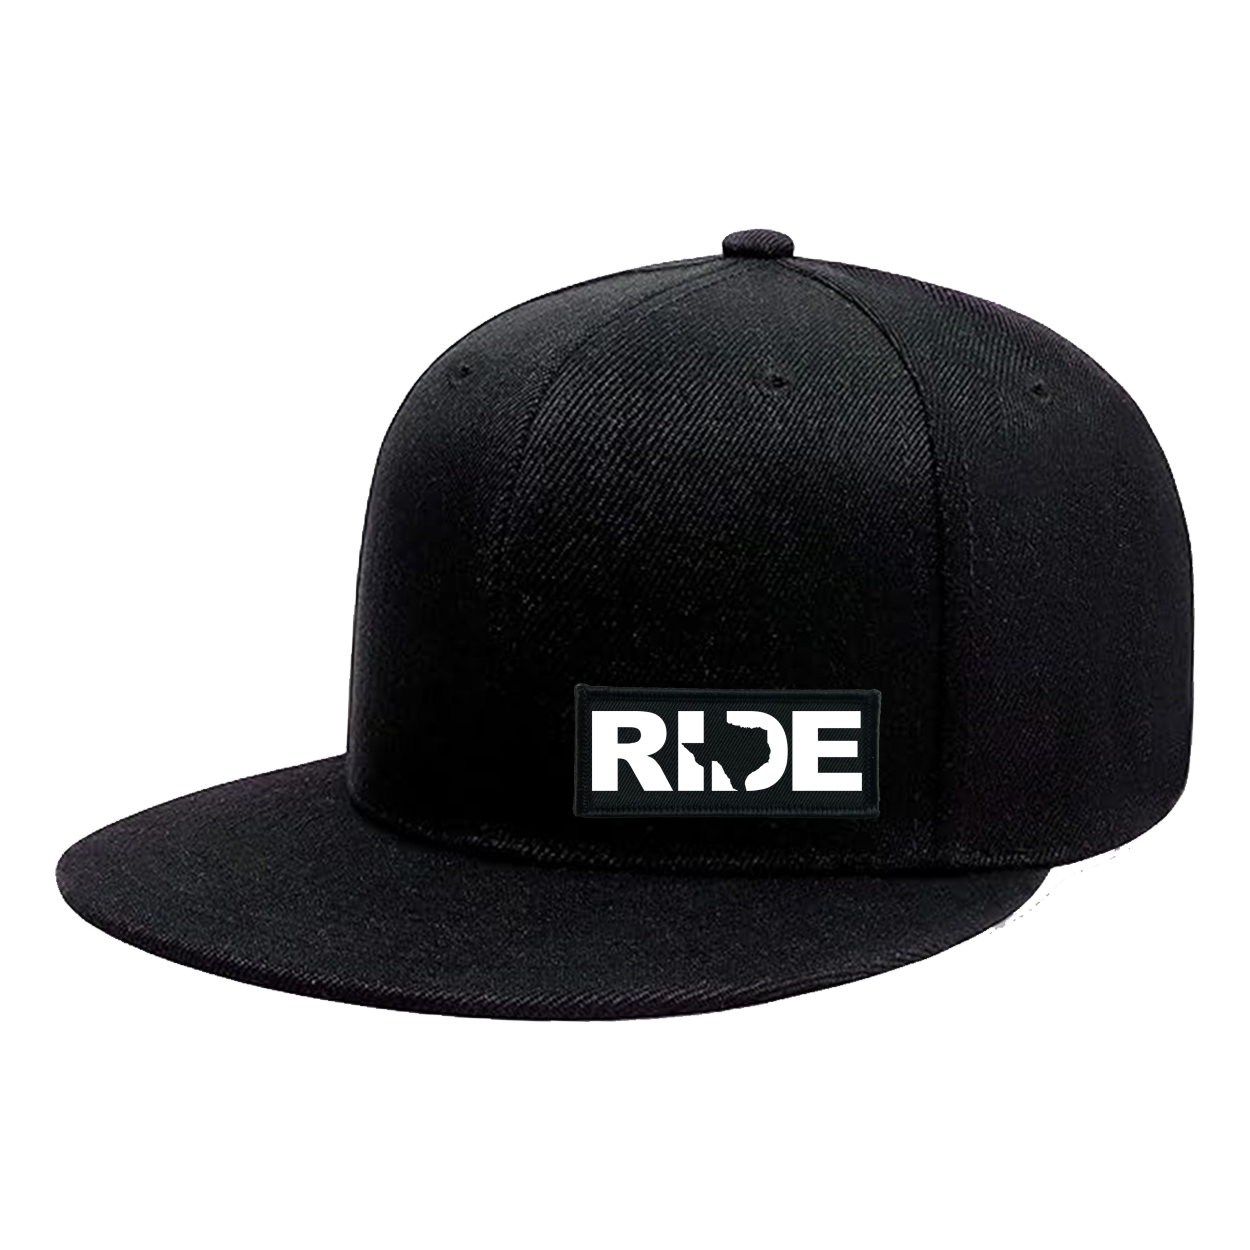 Ride Texas Night Out Woven Patch Snapback Flat Brim Hat Black